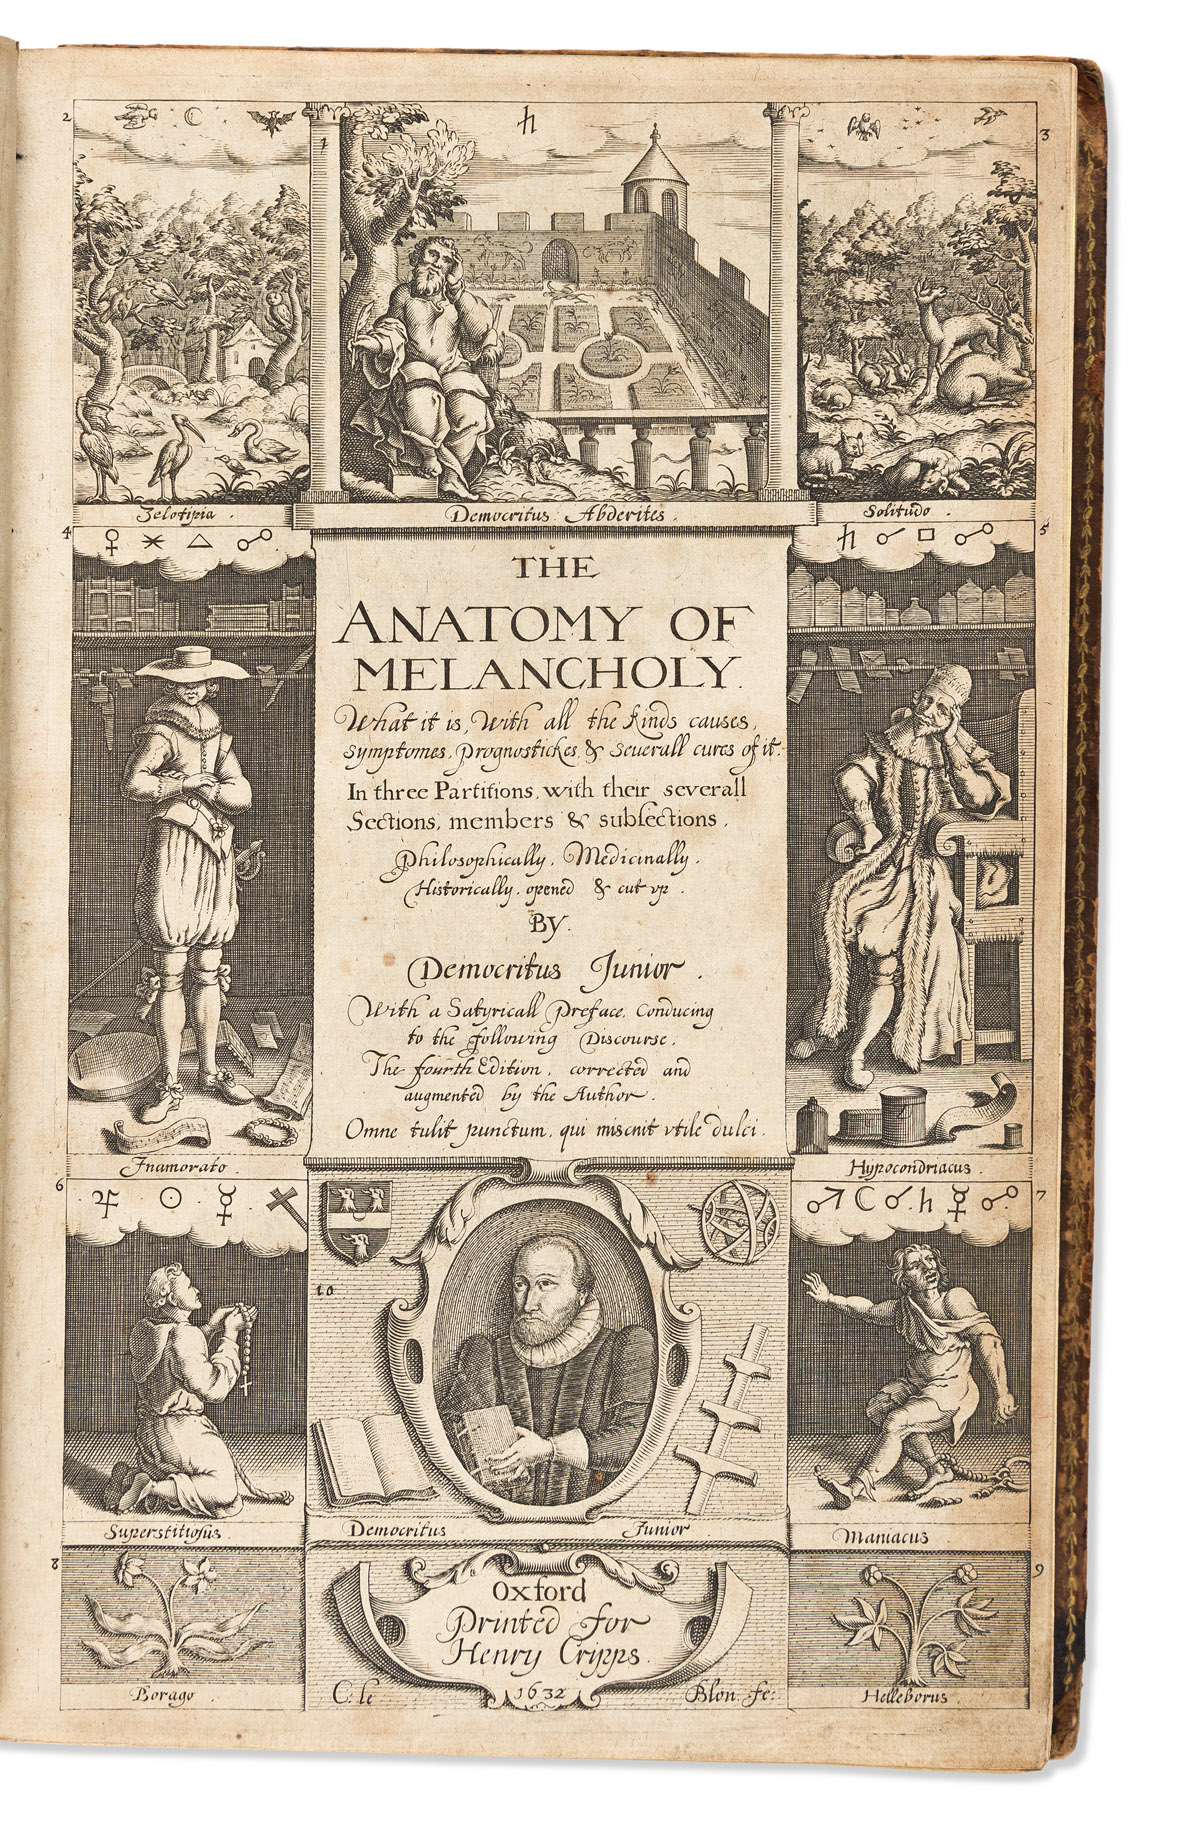 Burton, Robert (1577-1640) The Anatomy of Melancholy. What it is, with All the Kinds, Causes, Symptomes, Prognostickes, & Severall Cure